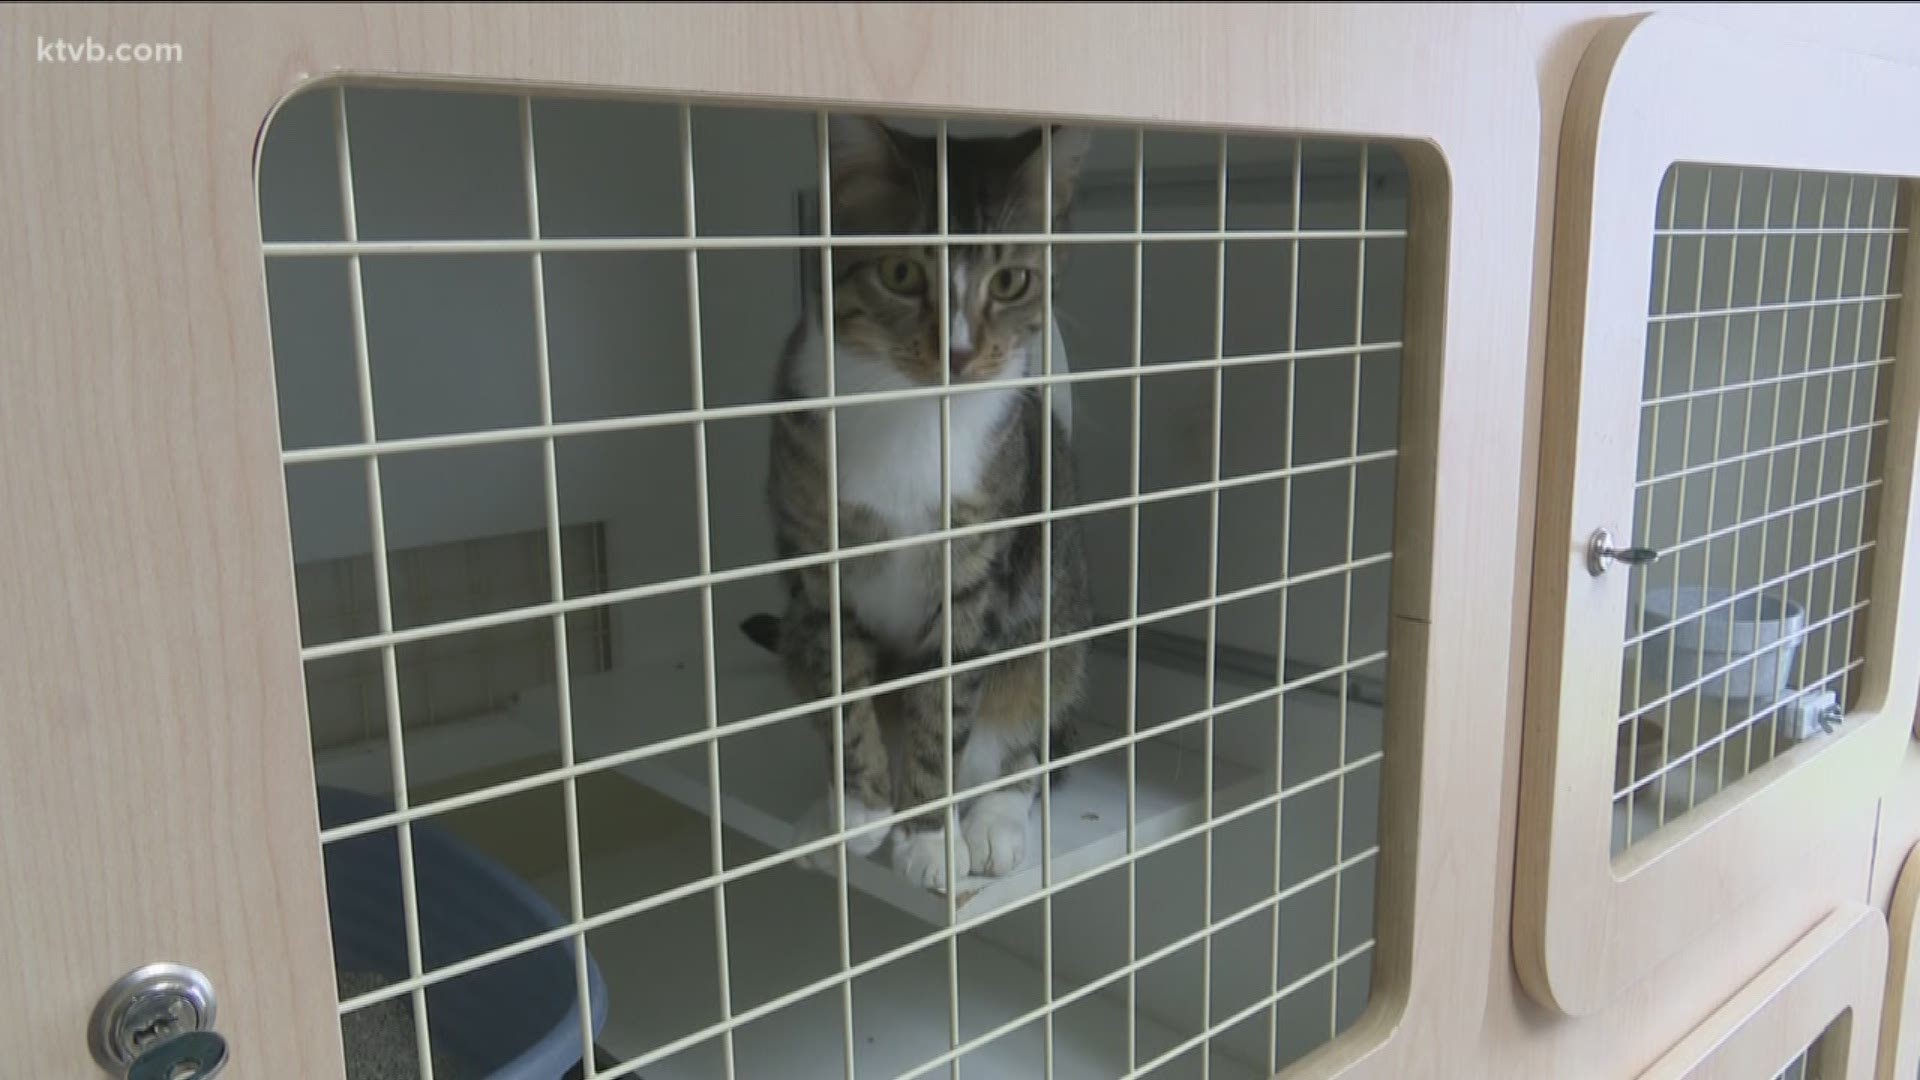 The Ontario Feral Cat Project is looking for homes for the cats.